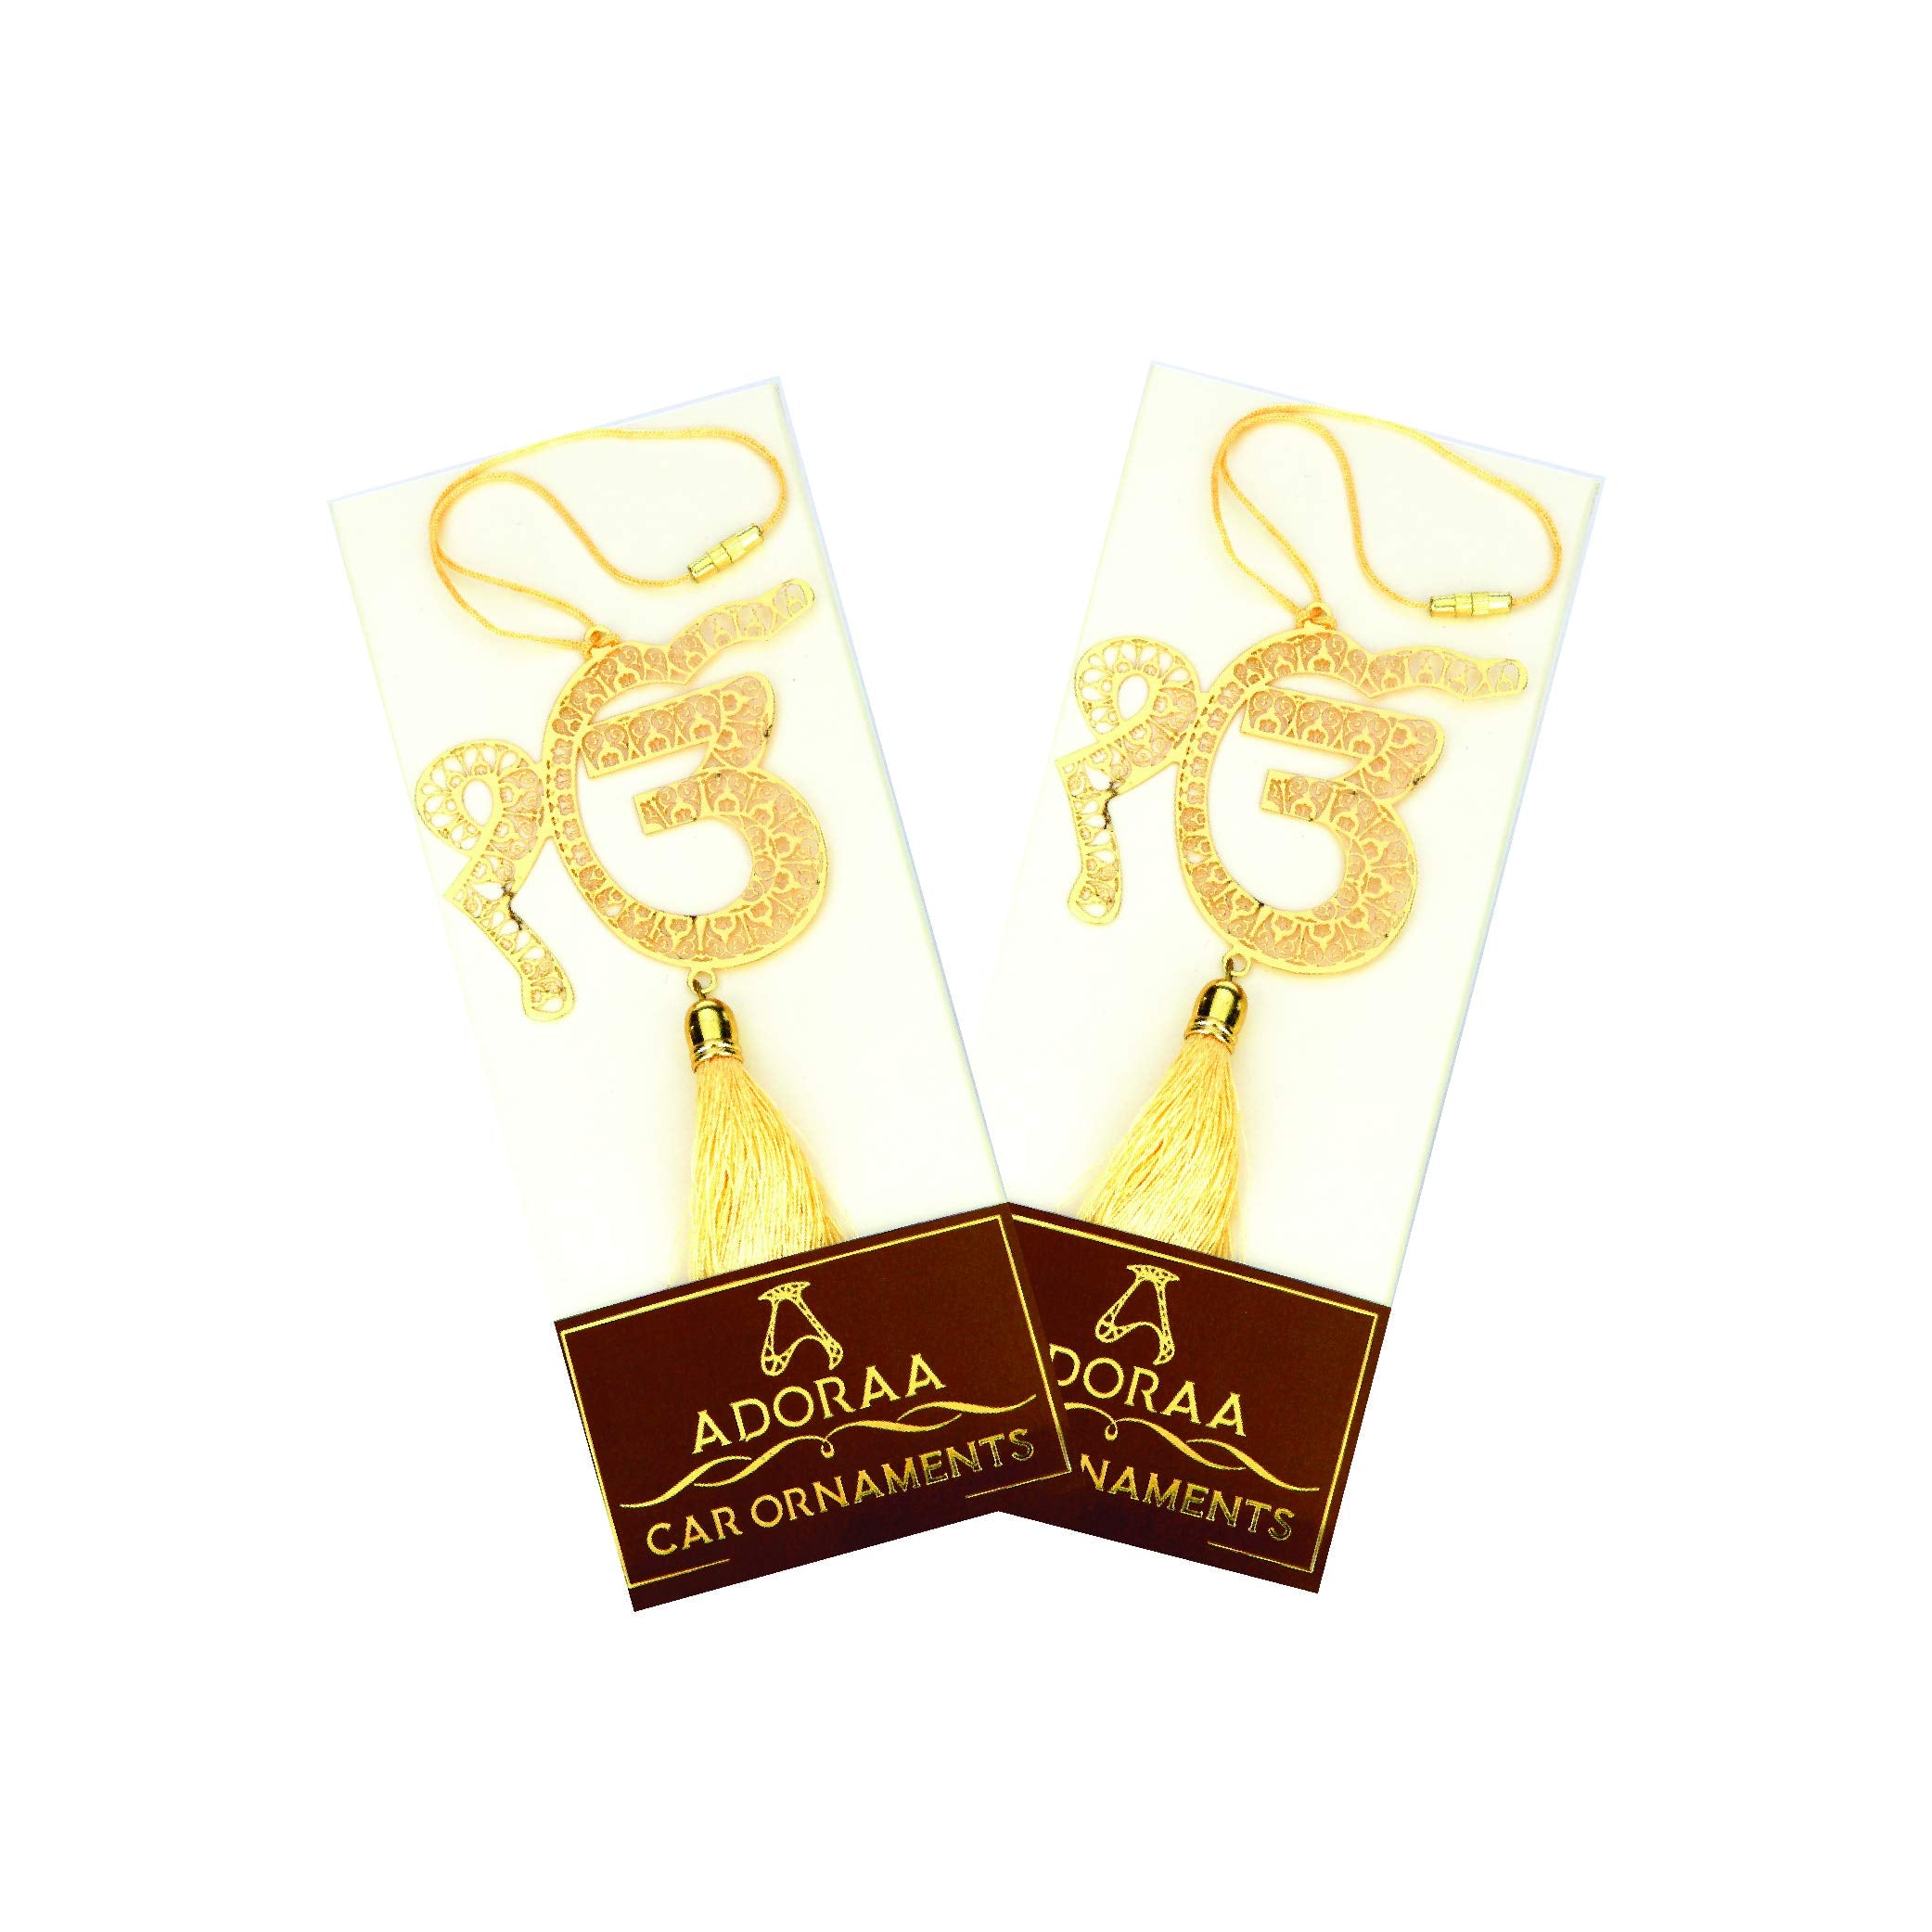 Pack of 2 - Punjabi Sikh Ik Onkar Hanging Accessories for Car rear view mirror Decor in Brass